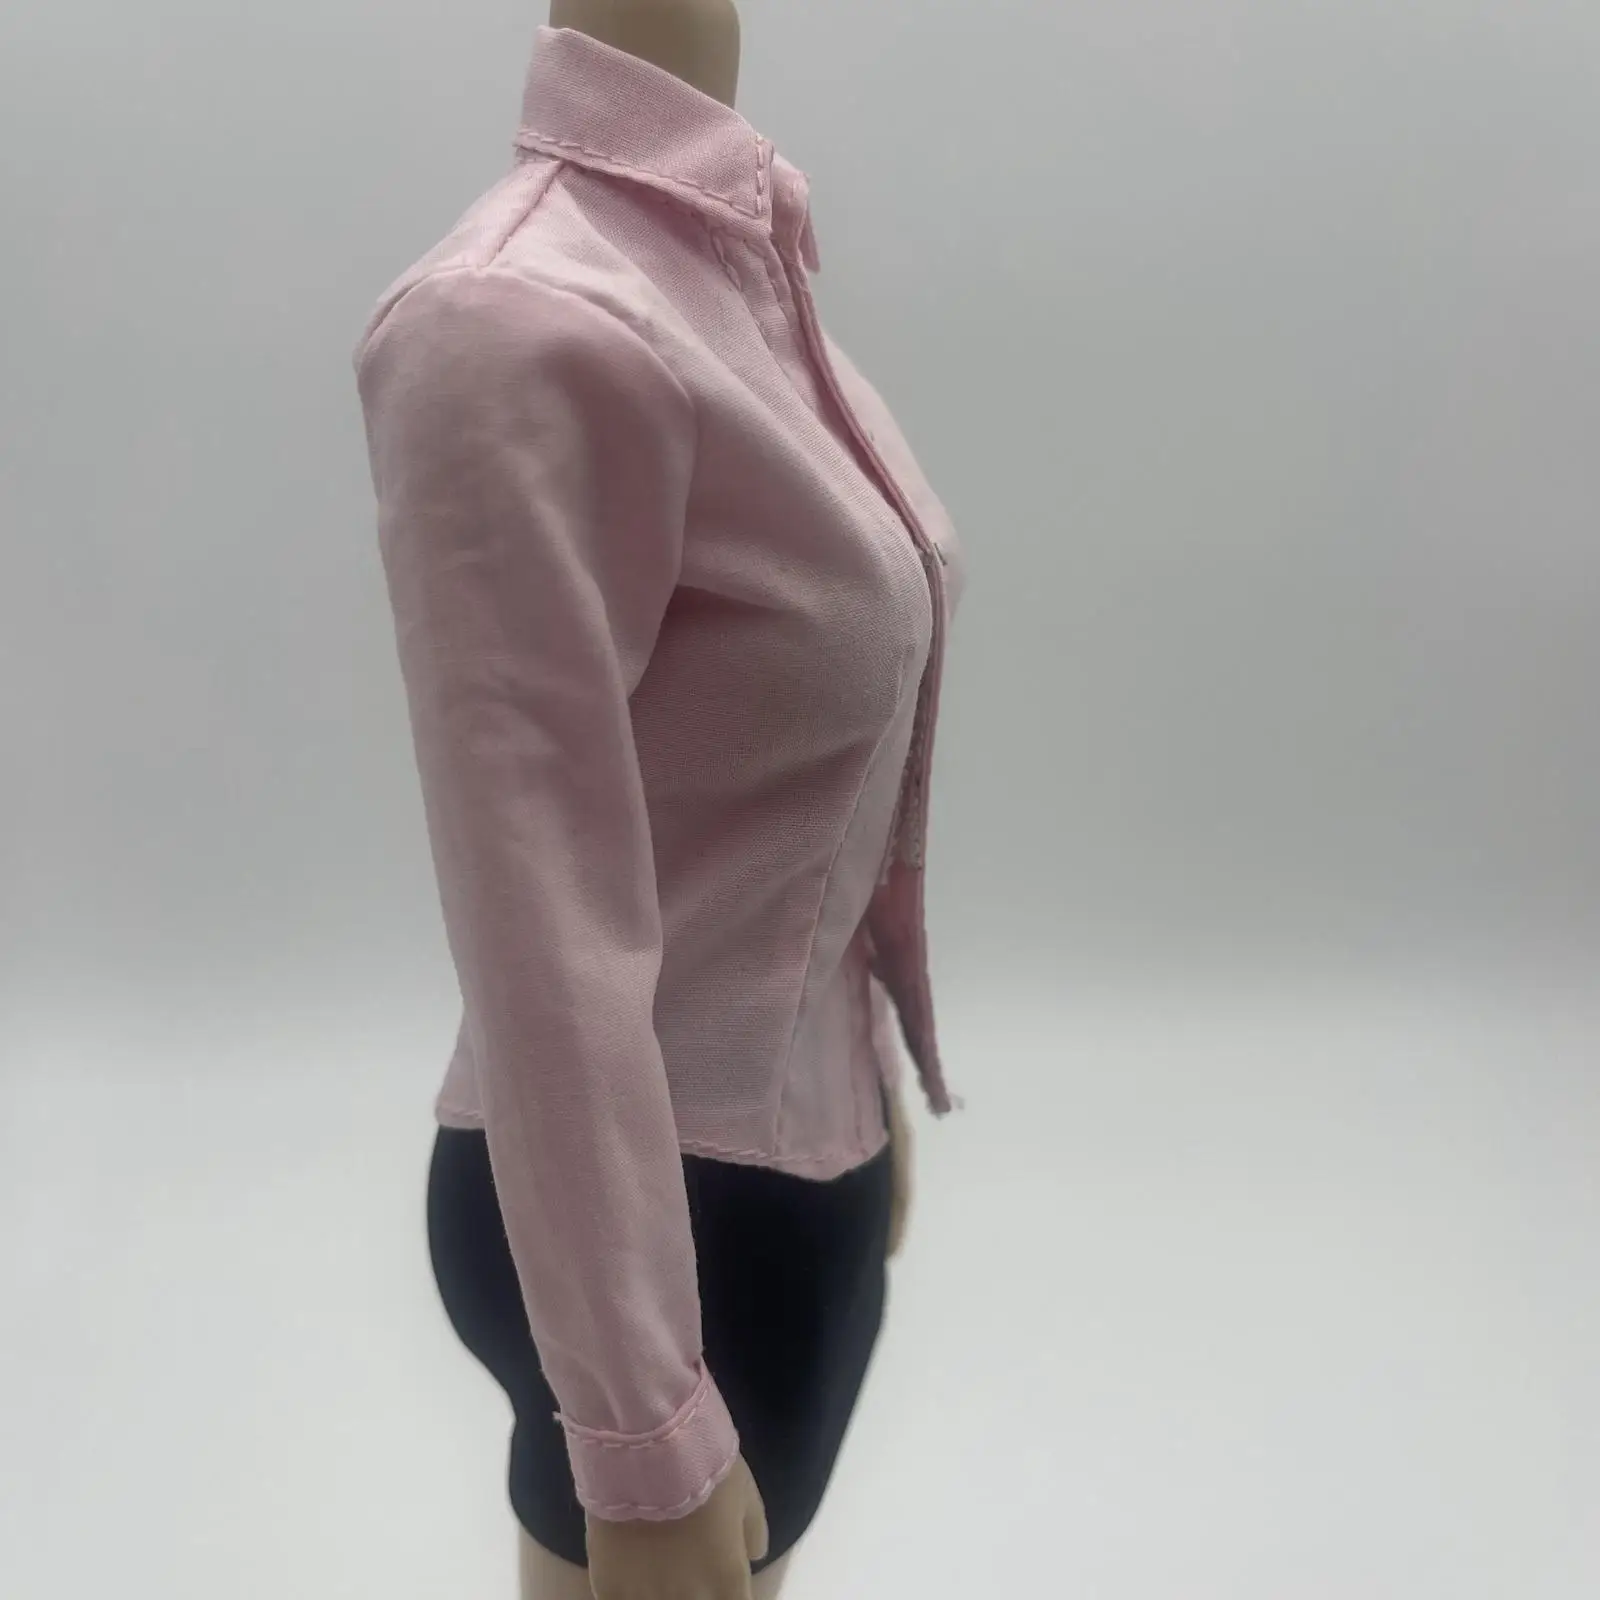 1/6 Girl Pink Long Sleeve Shirts for 12`` Action Figure Body Accessories